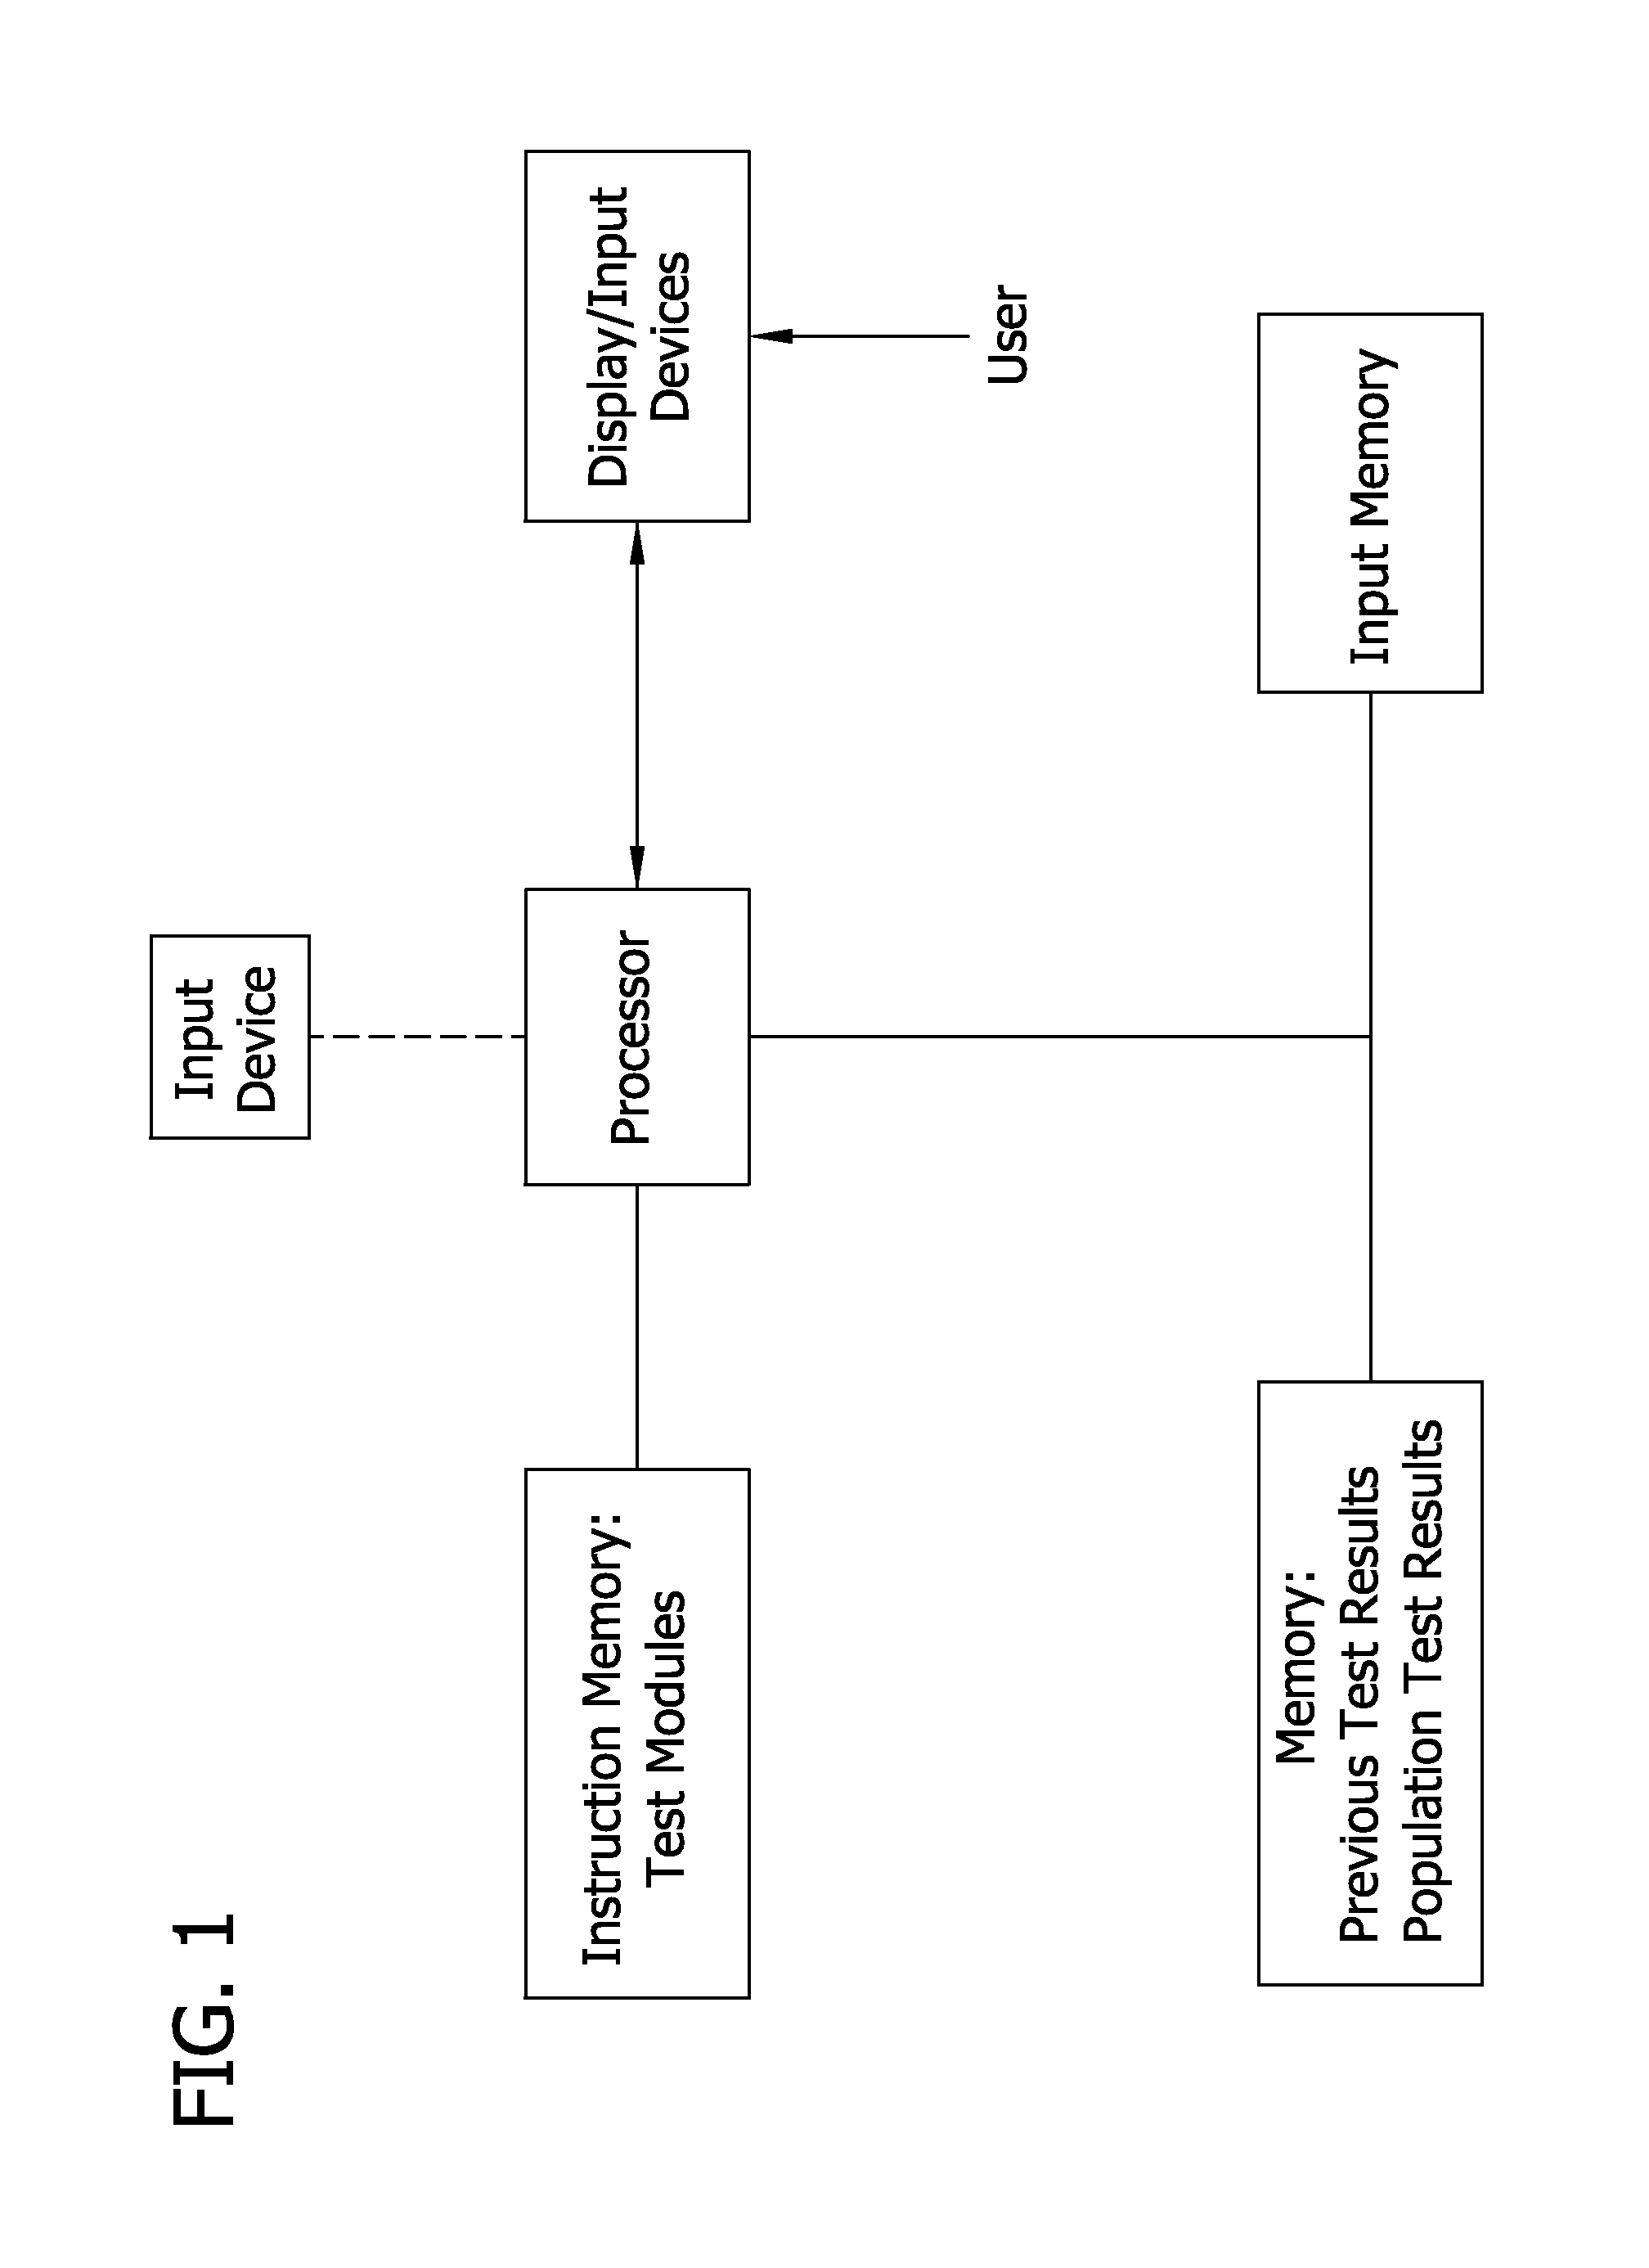 Computer-executed method, system, and computer readable medium for testing neuromechanical function